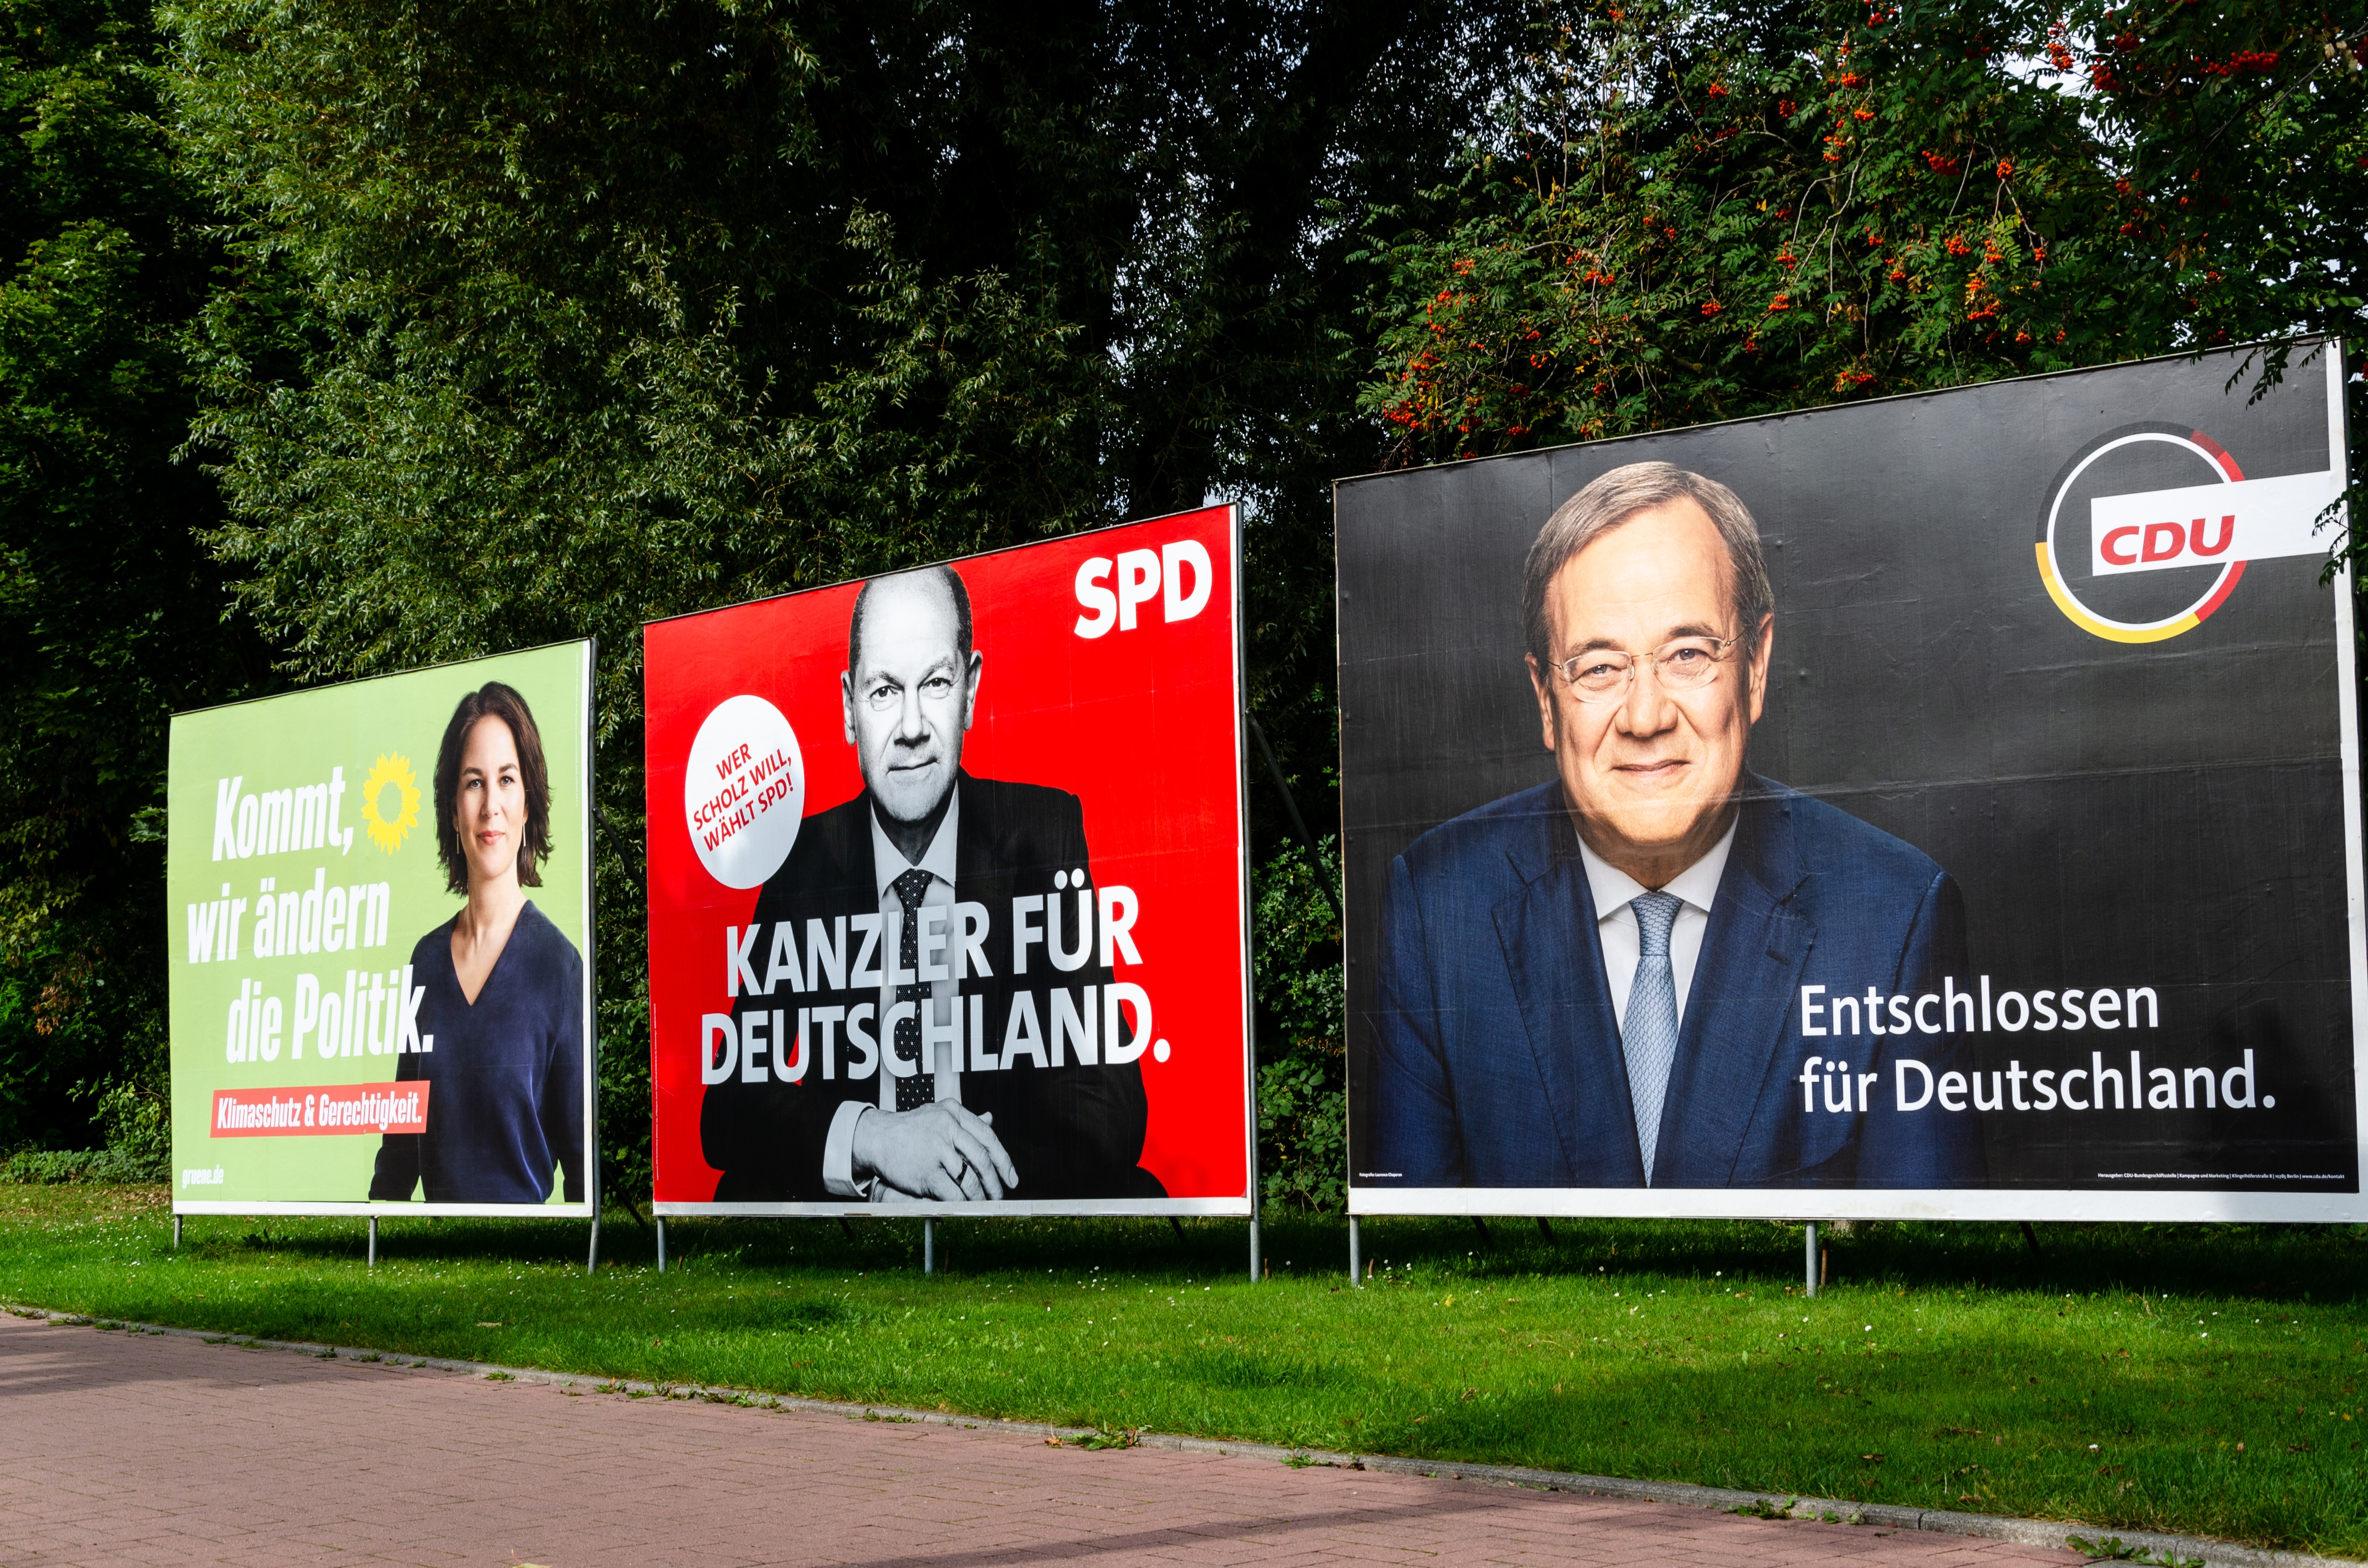 Soest, Germany - September 12, 2021: Election campaign posters of German political parties.